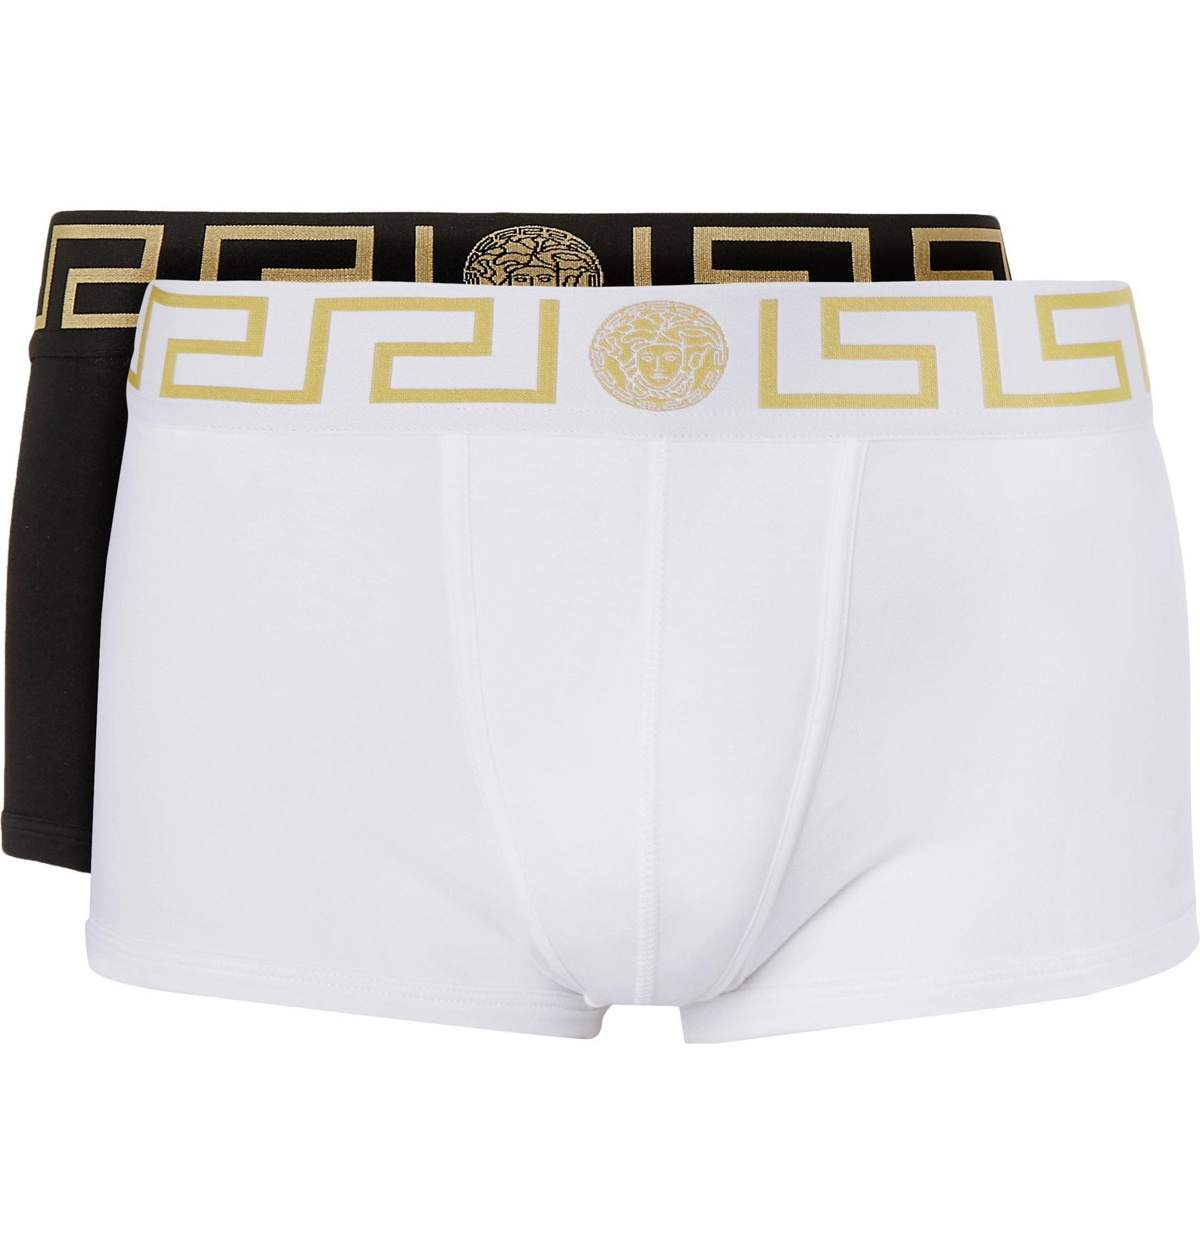 Versace - Two-Pack Stretch-Cotton Boxer Briefs - Multi Versace